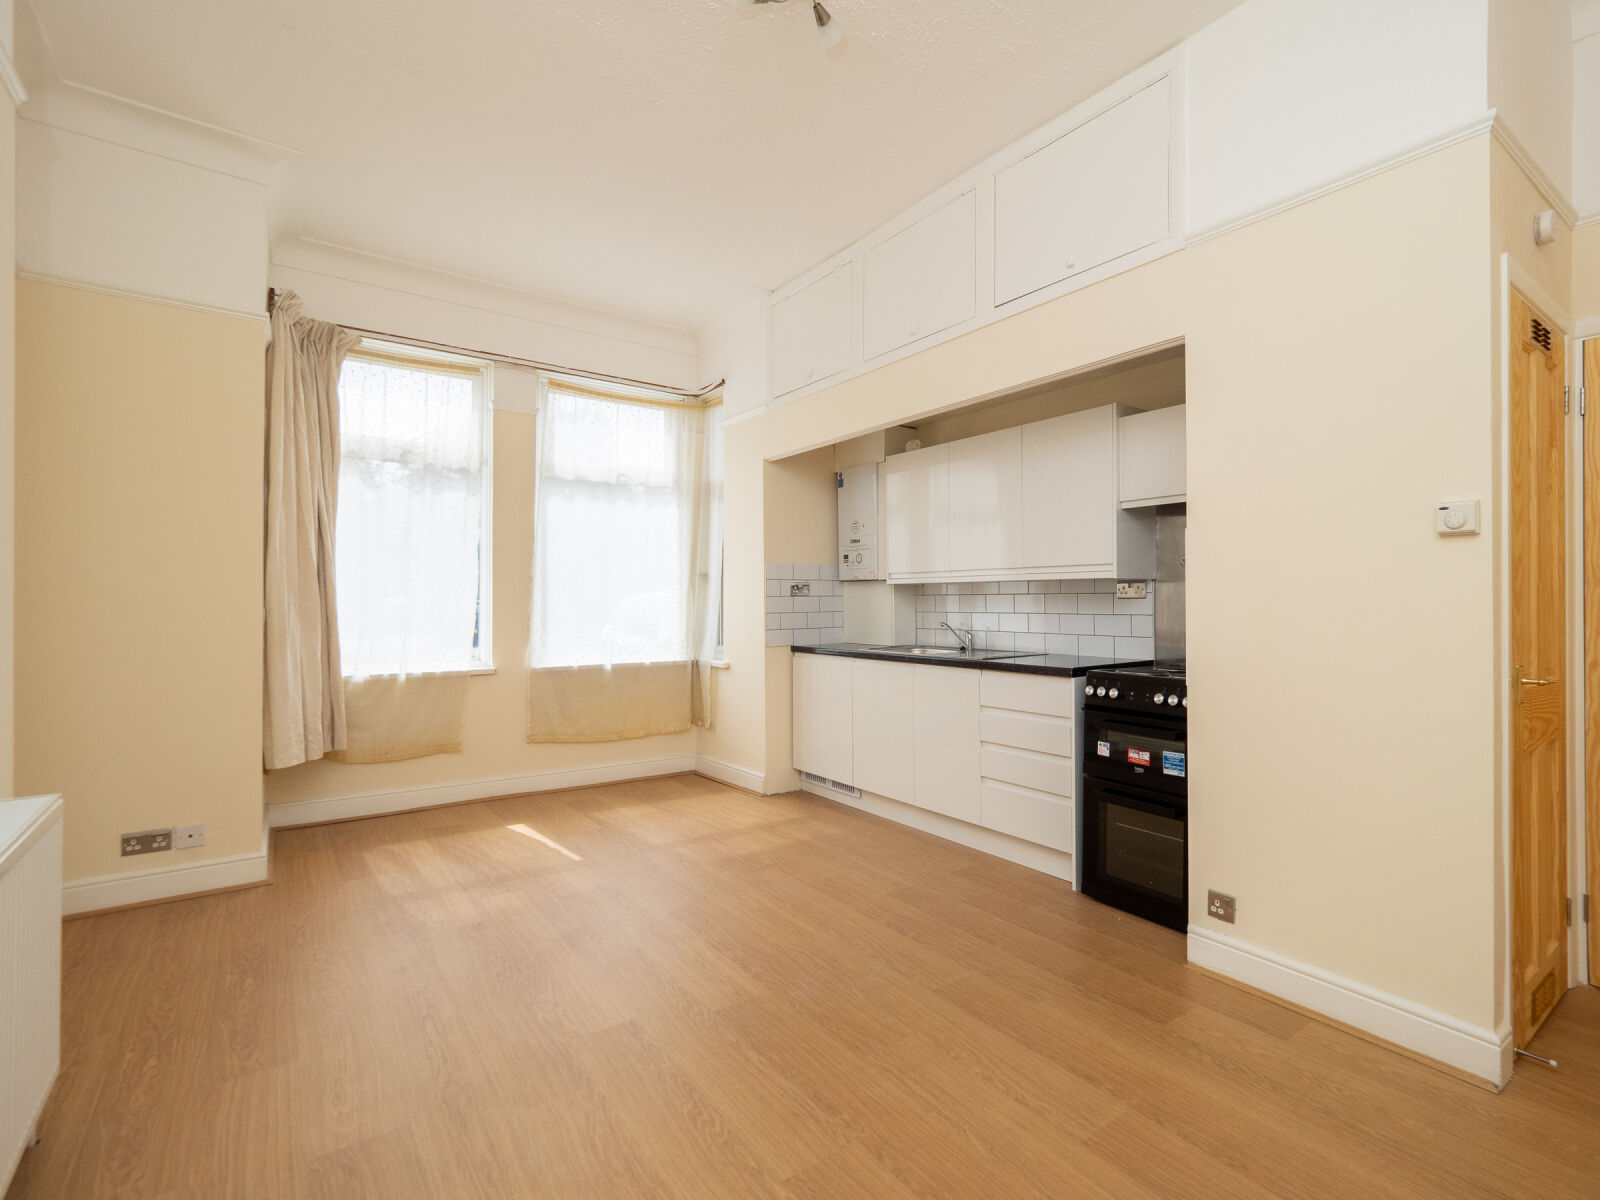 1 bedroom  flat to rent, Available now Pepys Road, London, SW20, main image